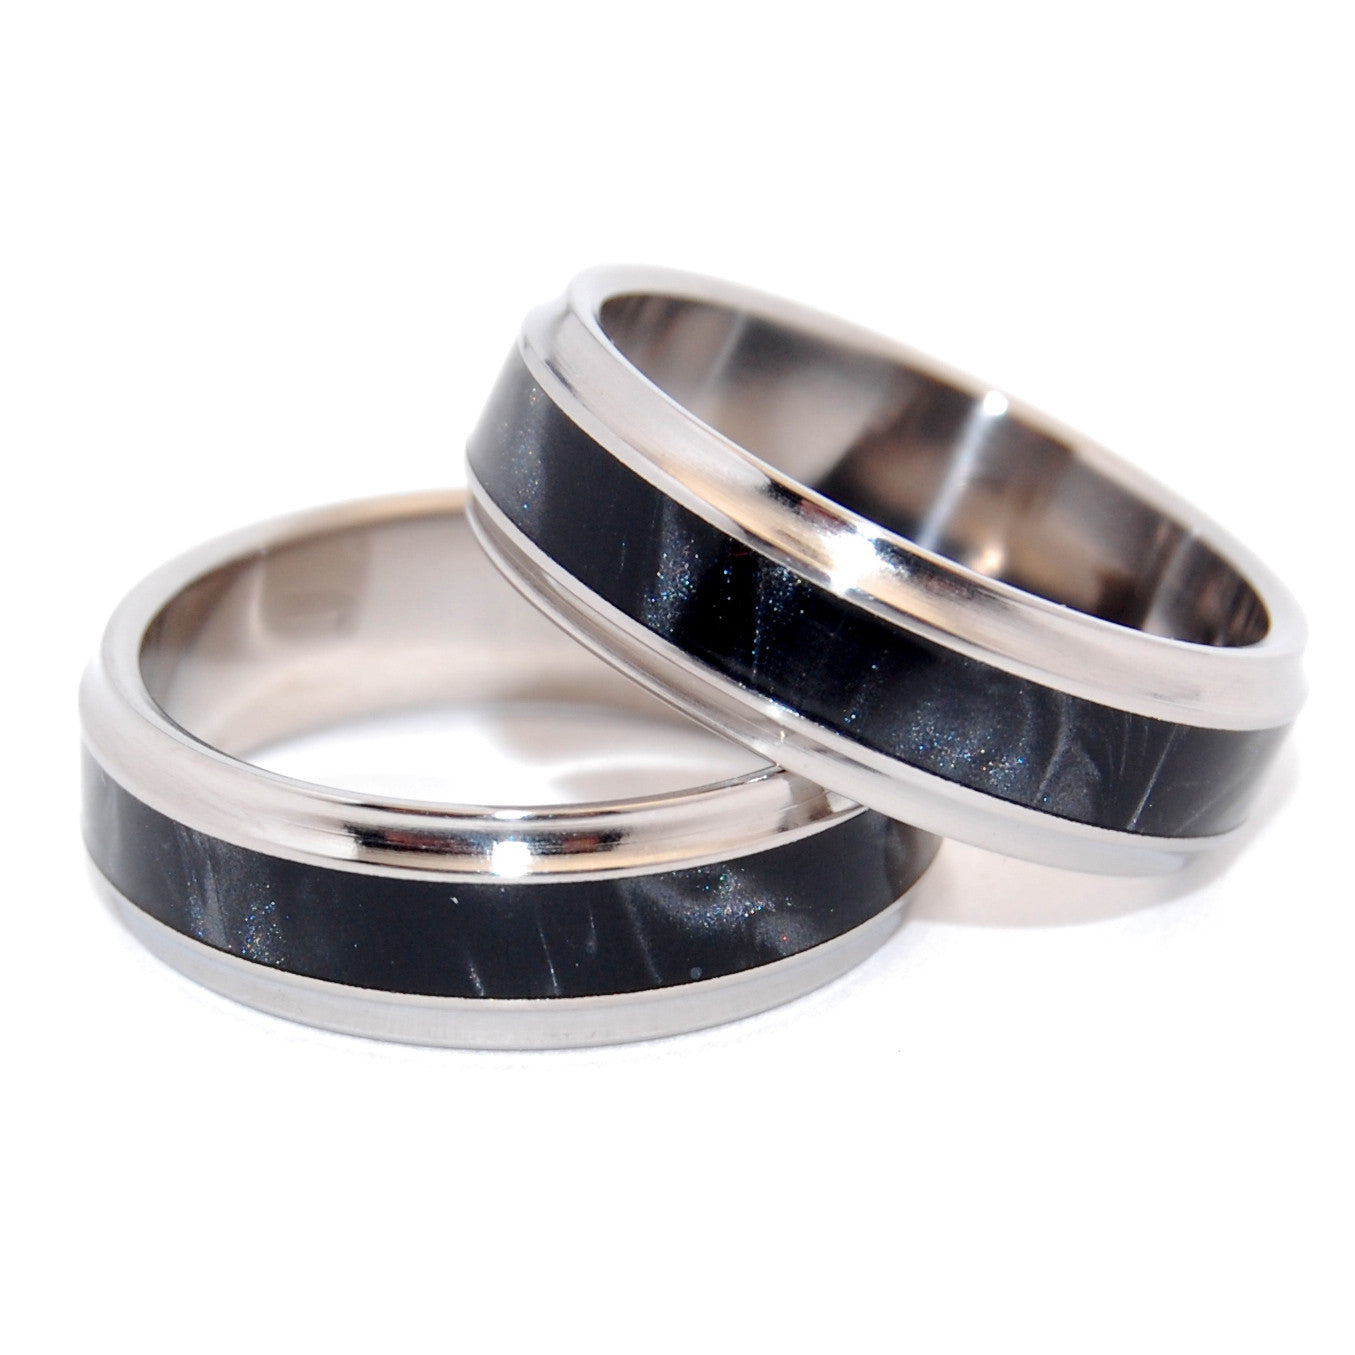 PAPARAZZI | Black Marbled Opalescent Resin - Titanium Wedding Rings - Black Rings set - Minter and Richter Designs